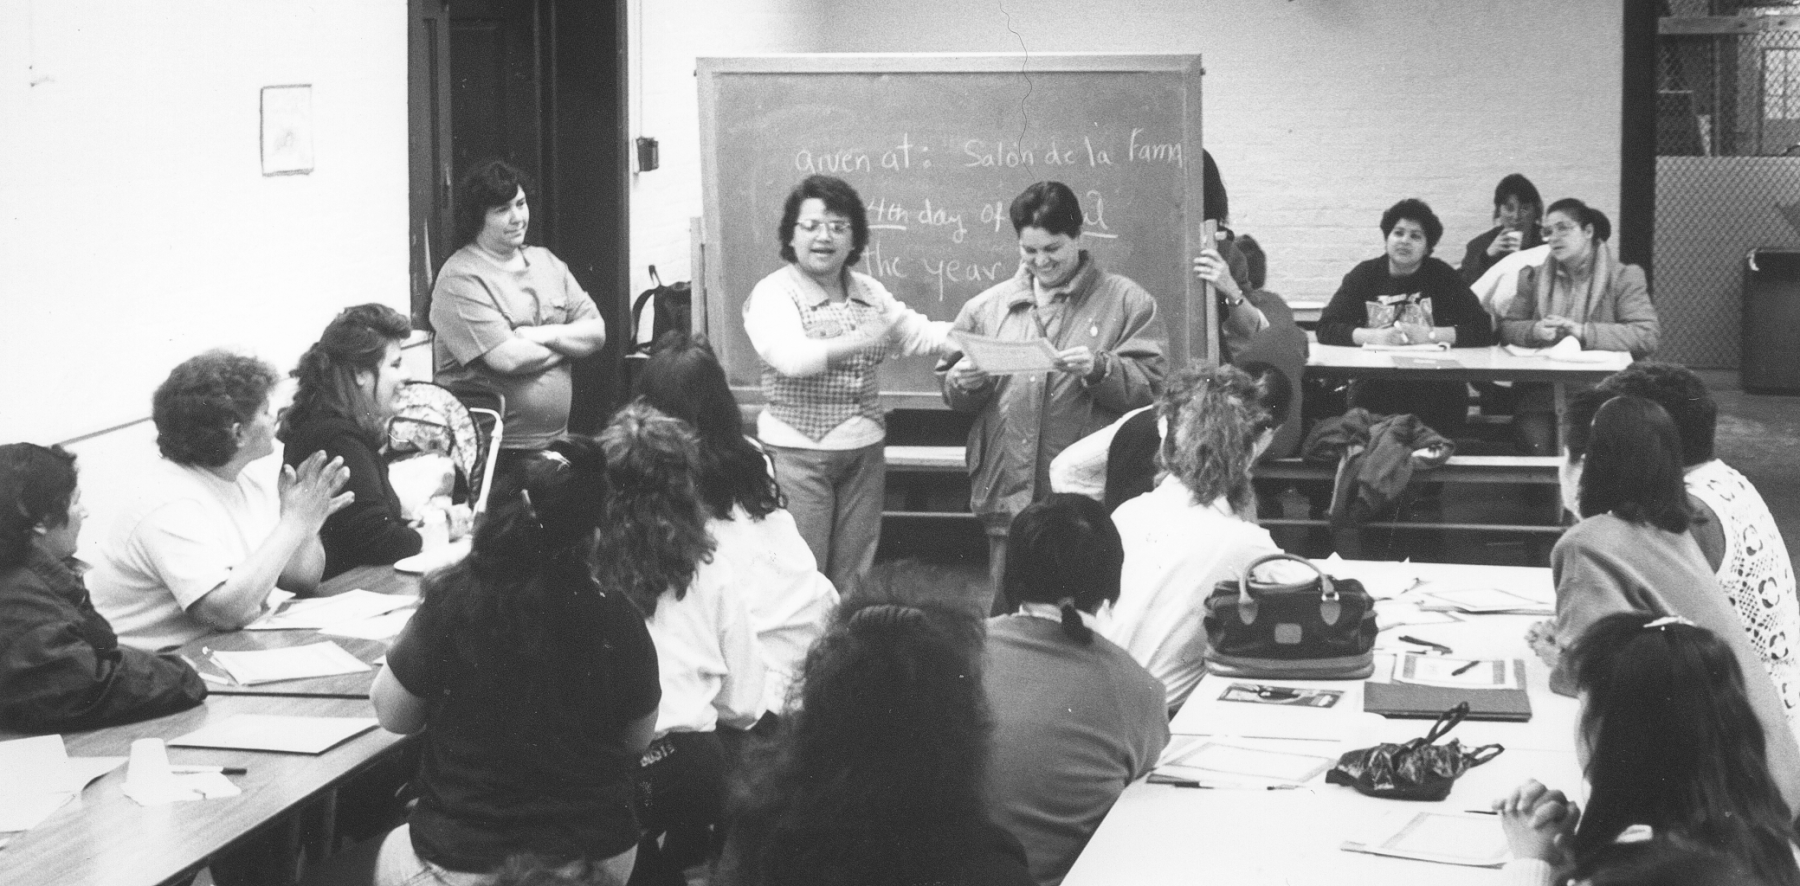 A black and white photo of a group of women in a classroom. Two are standing near the chalkboard, with one woman speaking and the other holding a certificate.